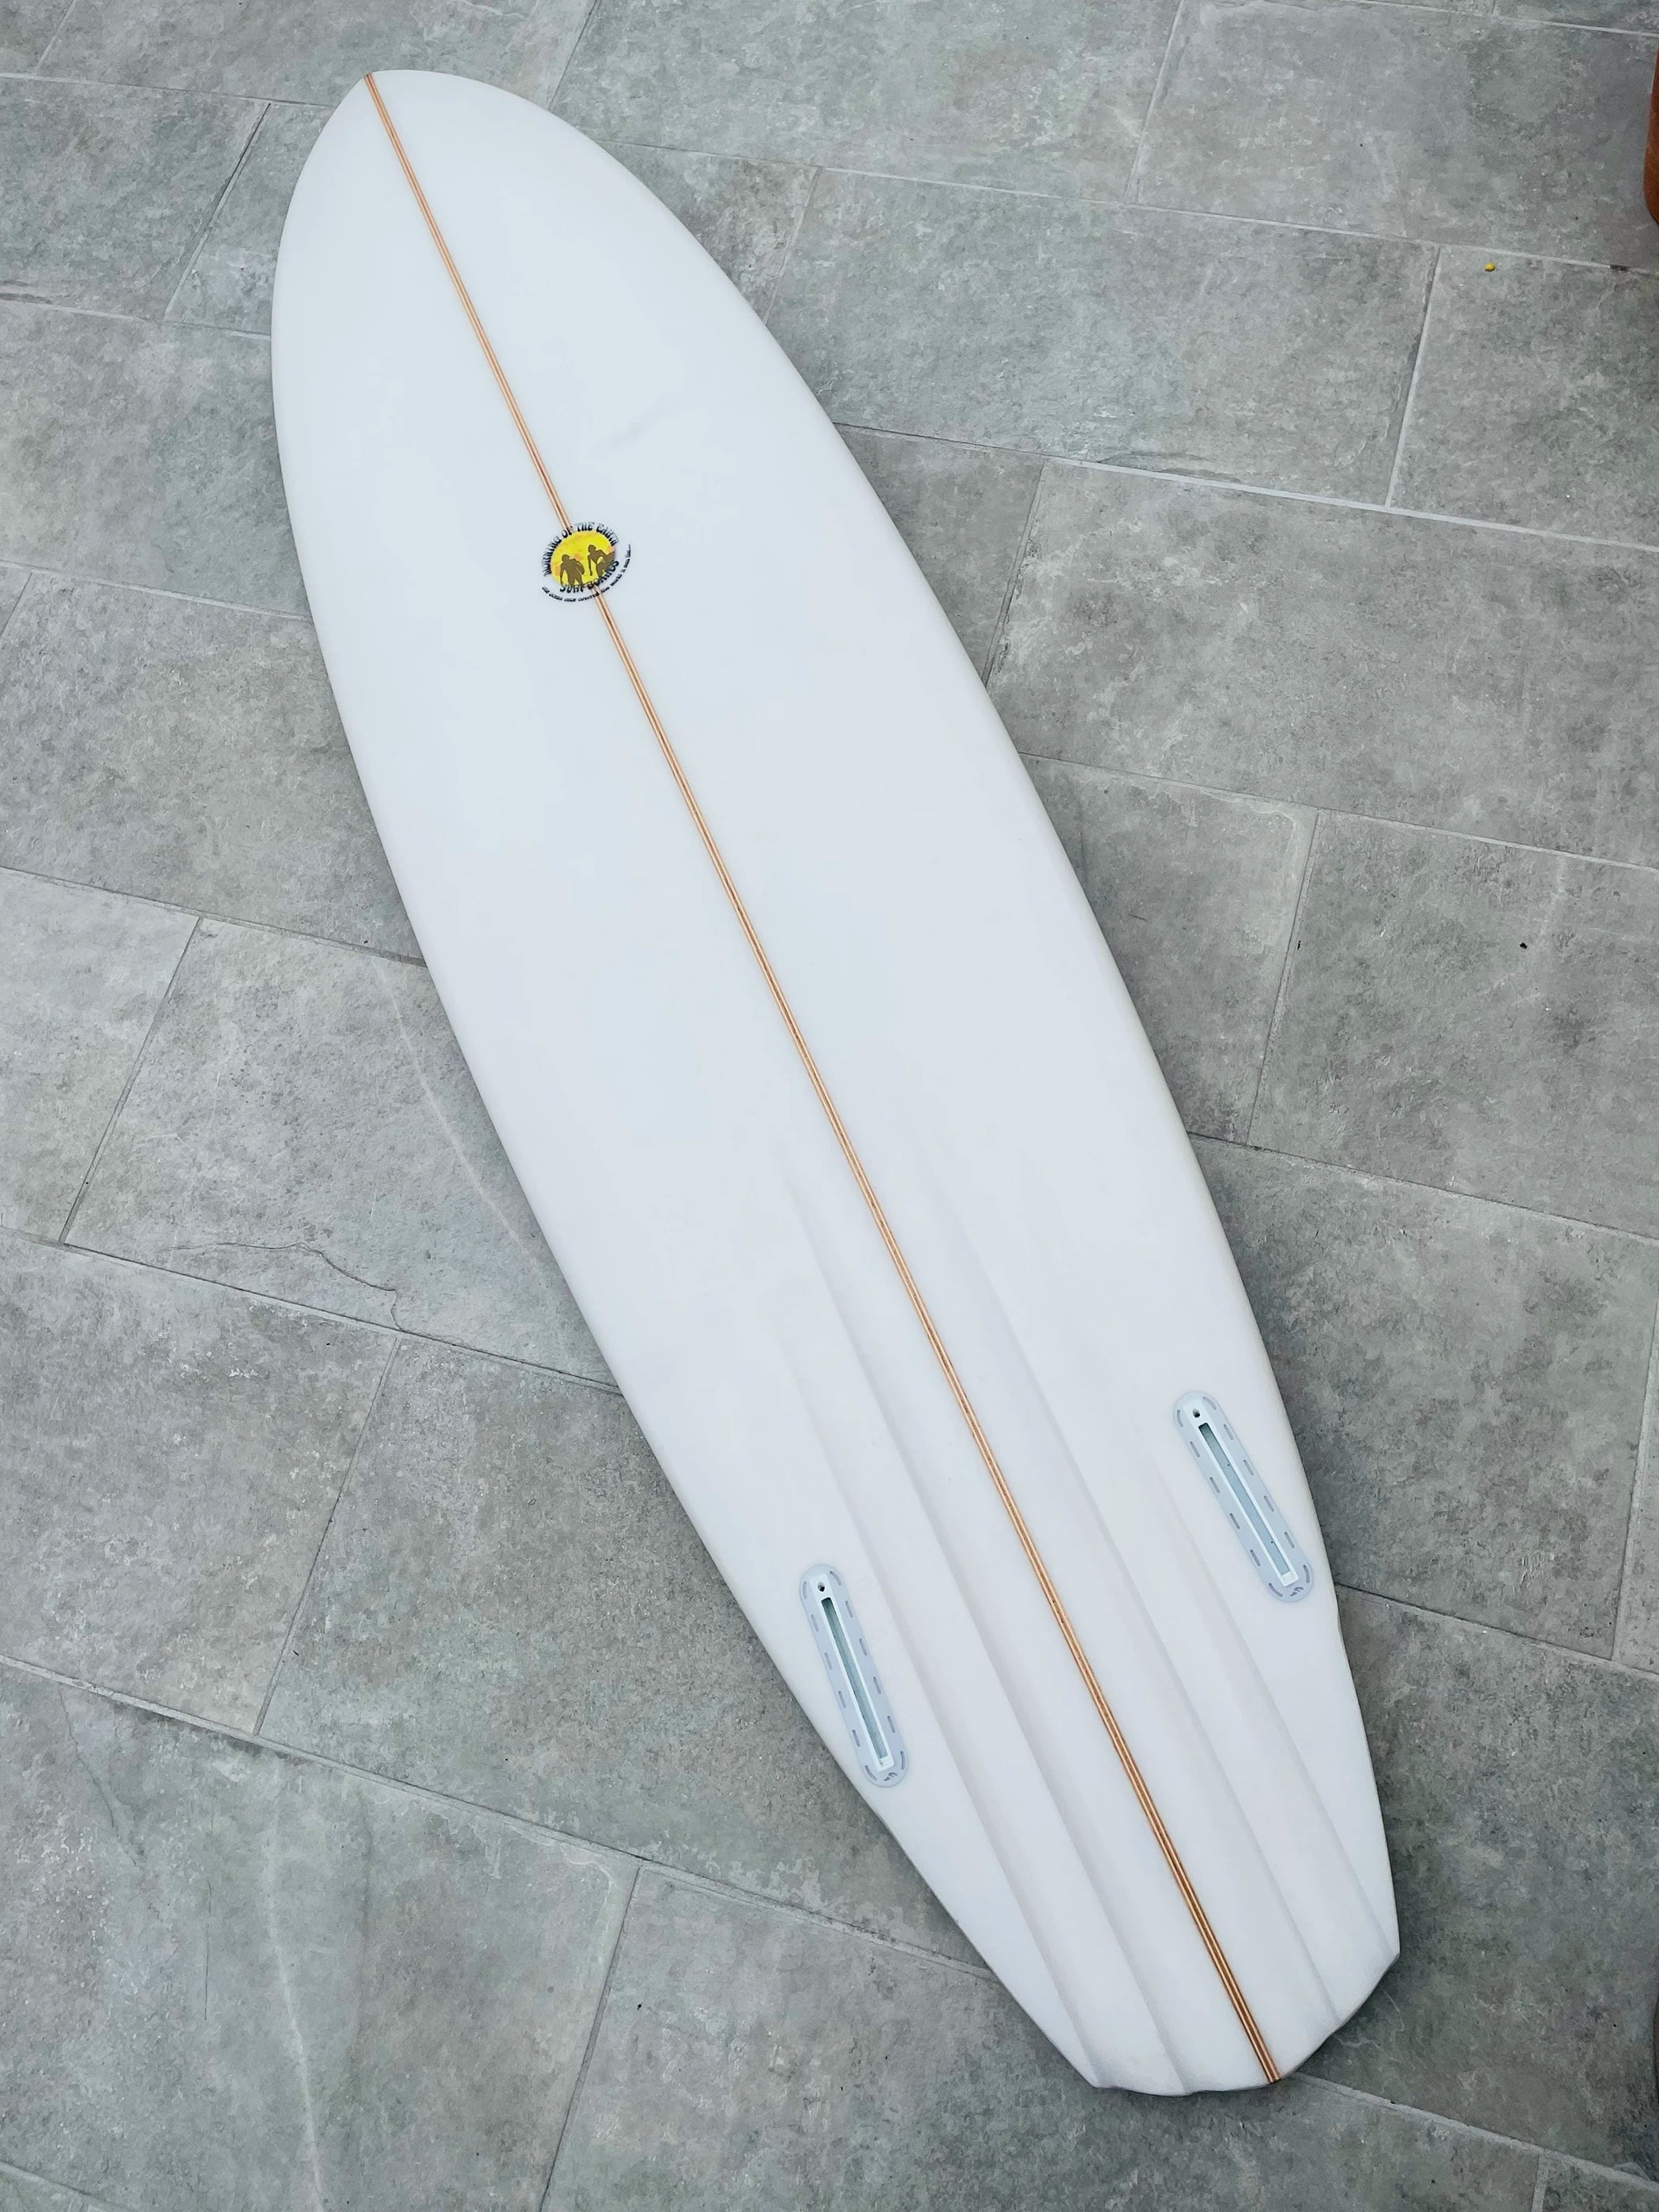 Morning Of The Earth | 6’7” FIJI Diamond Tail Clear Surfboard (USED)